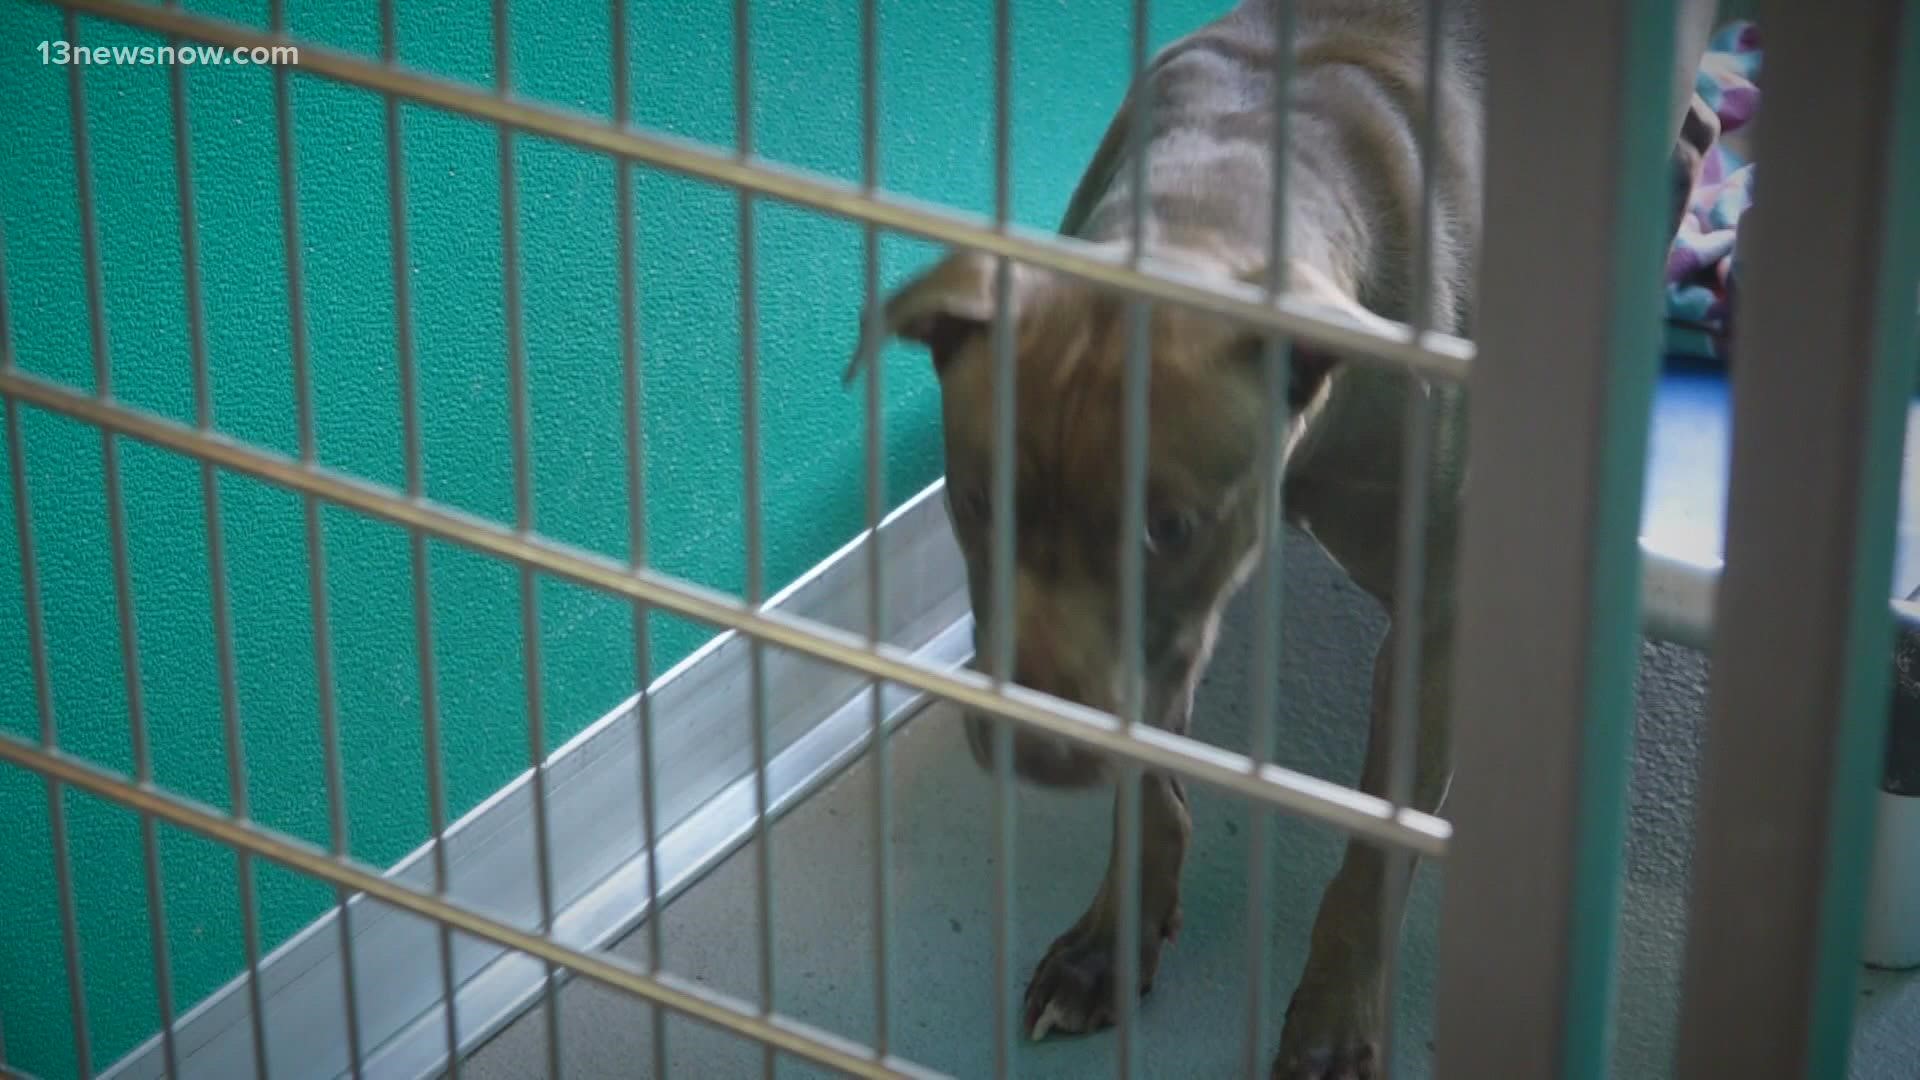 Adoptions are expected to resume later this week, after workers are able to determine that the virus from the stray dog did not spread.